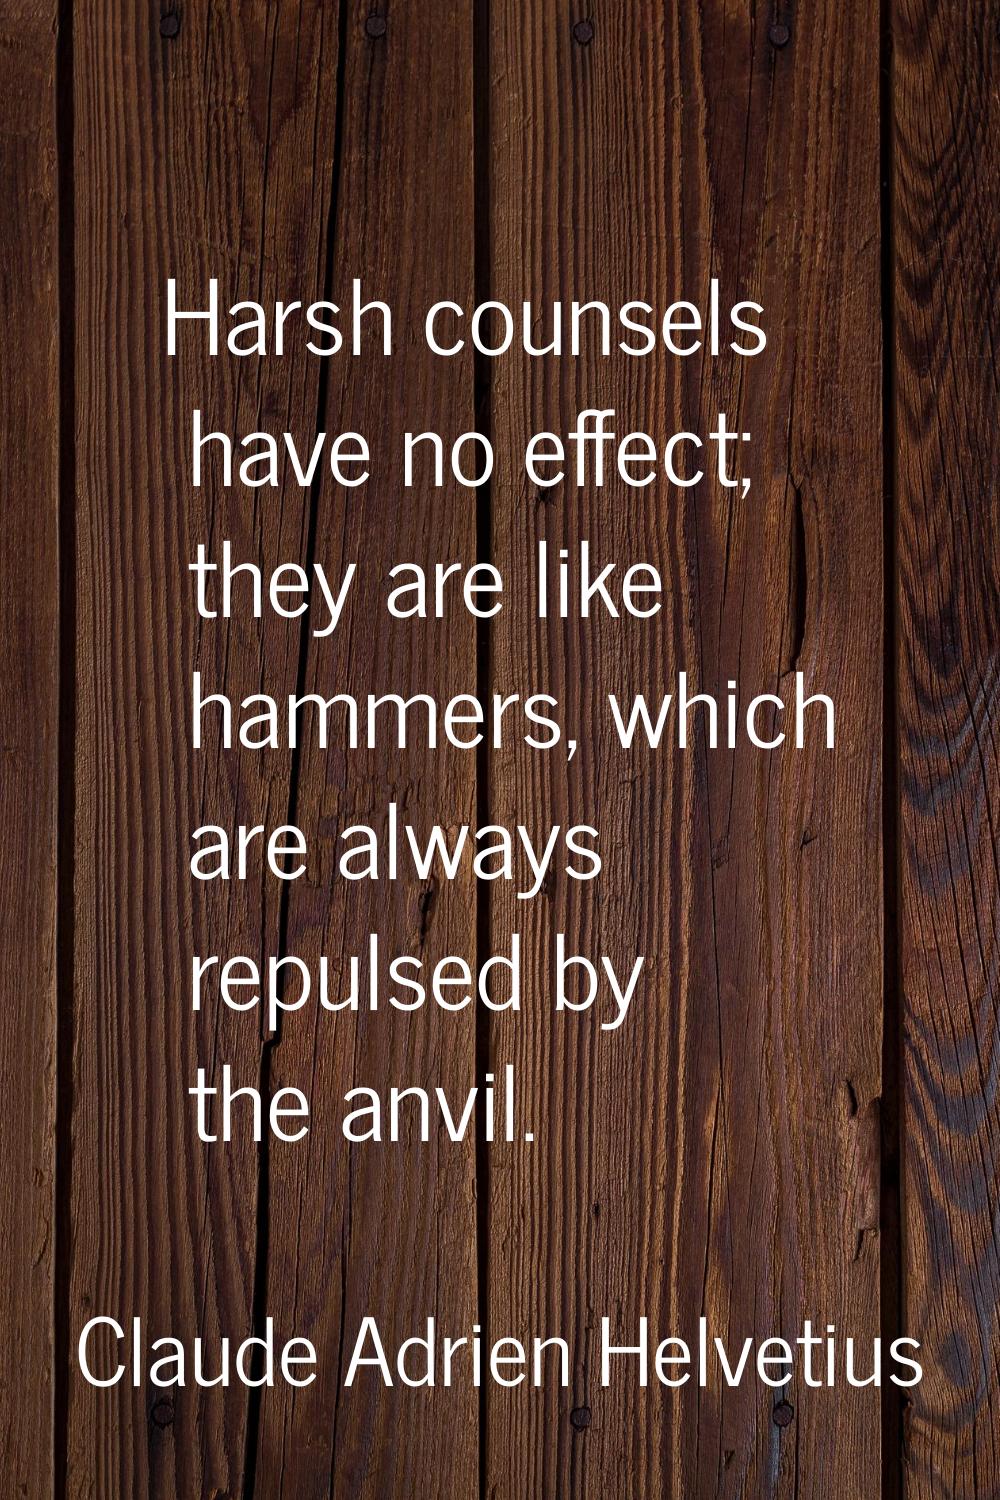 Harsh counsels have no effect; they are like hammers, which are always repulsed by the anvil.